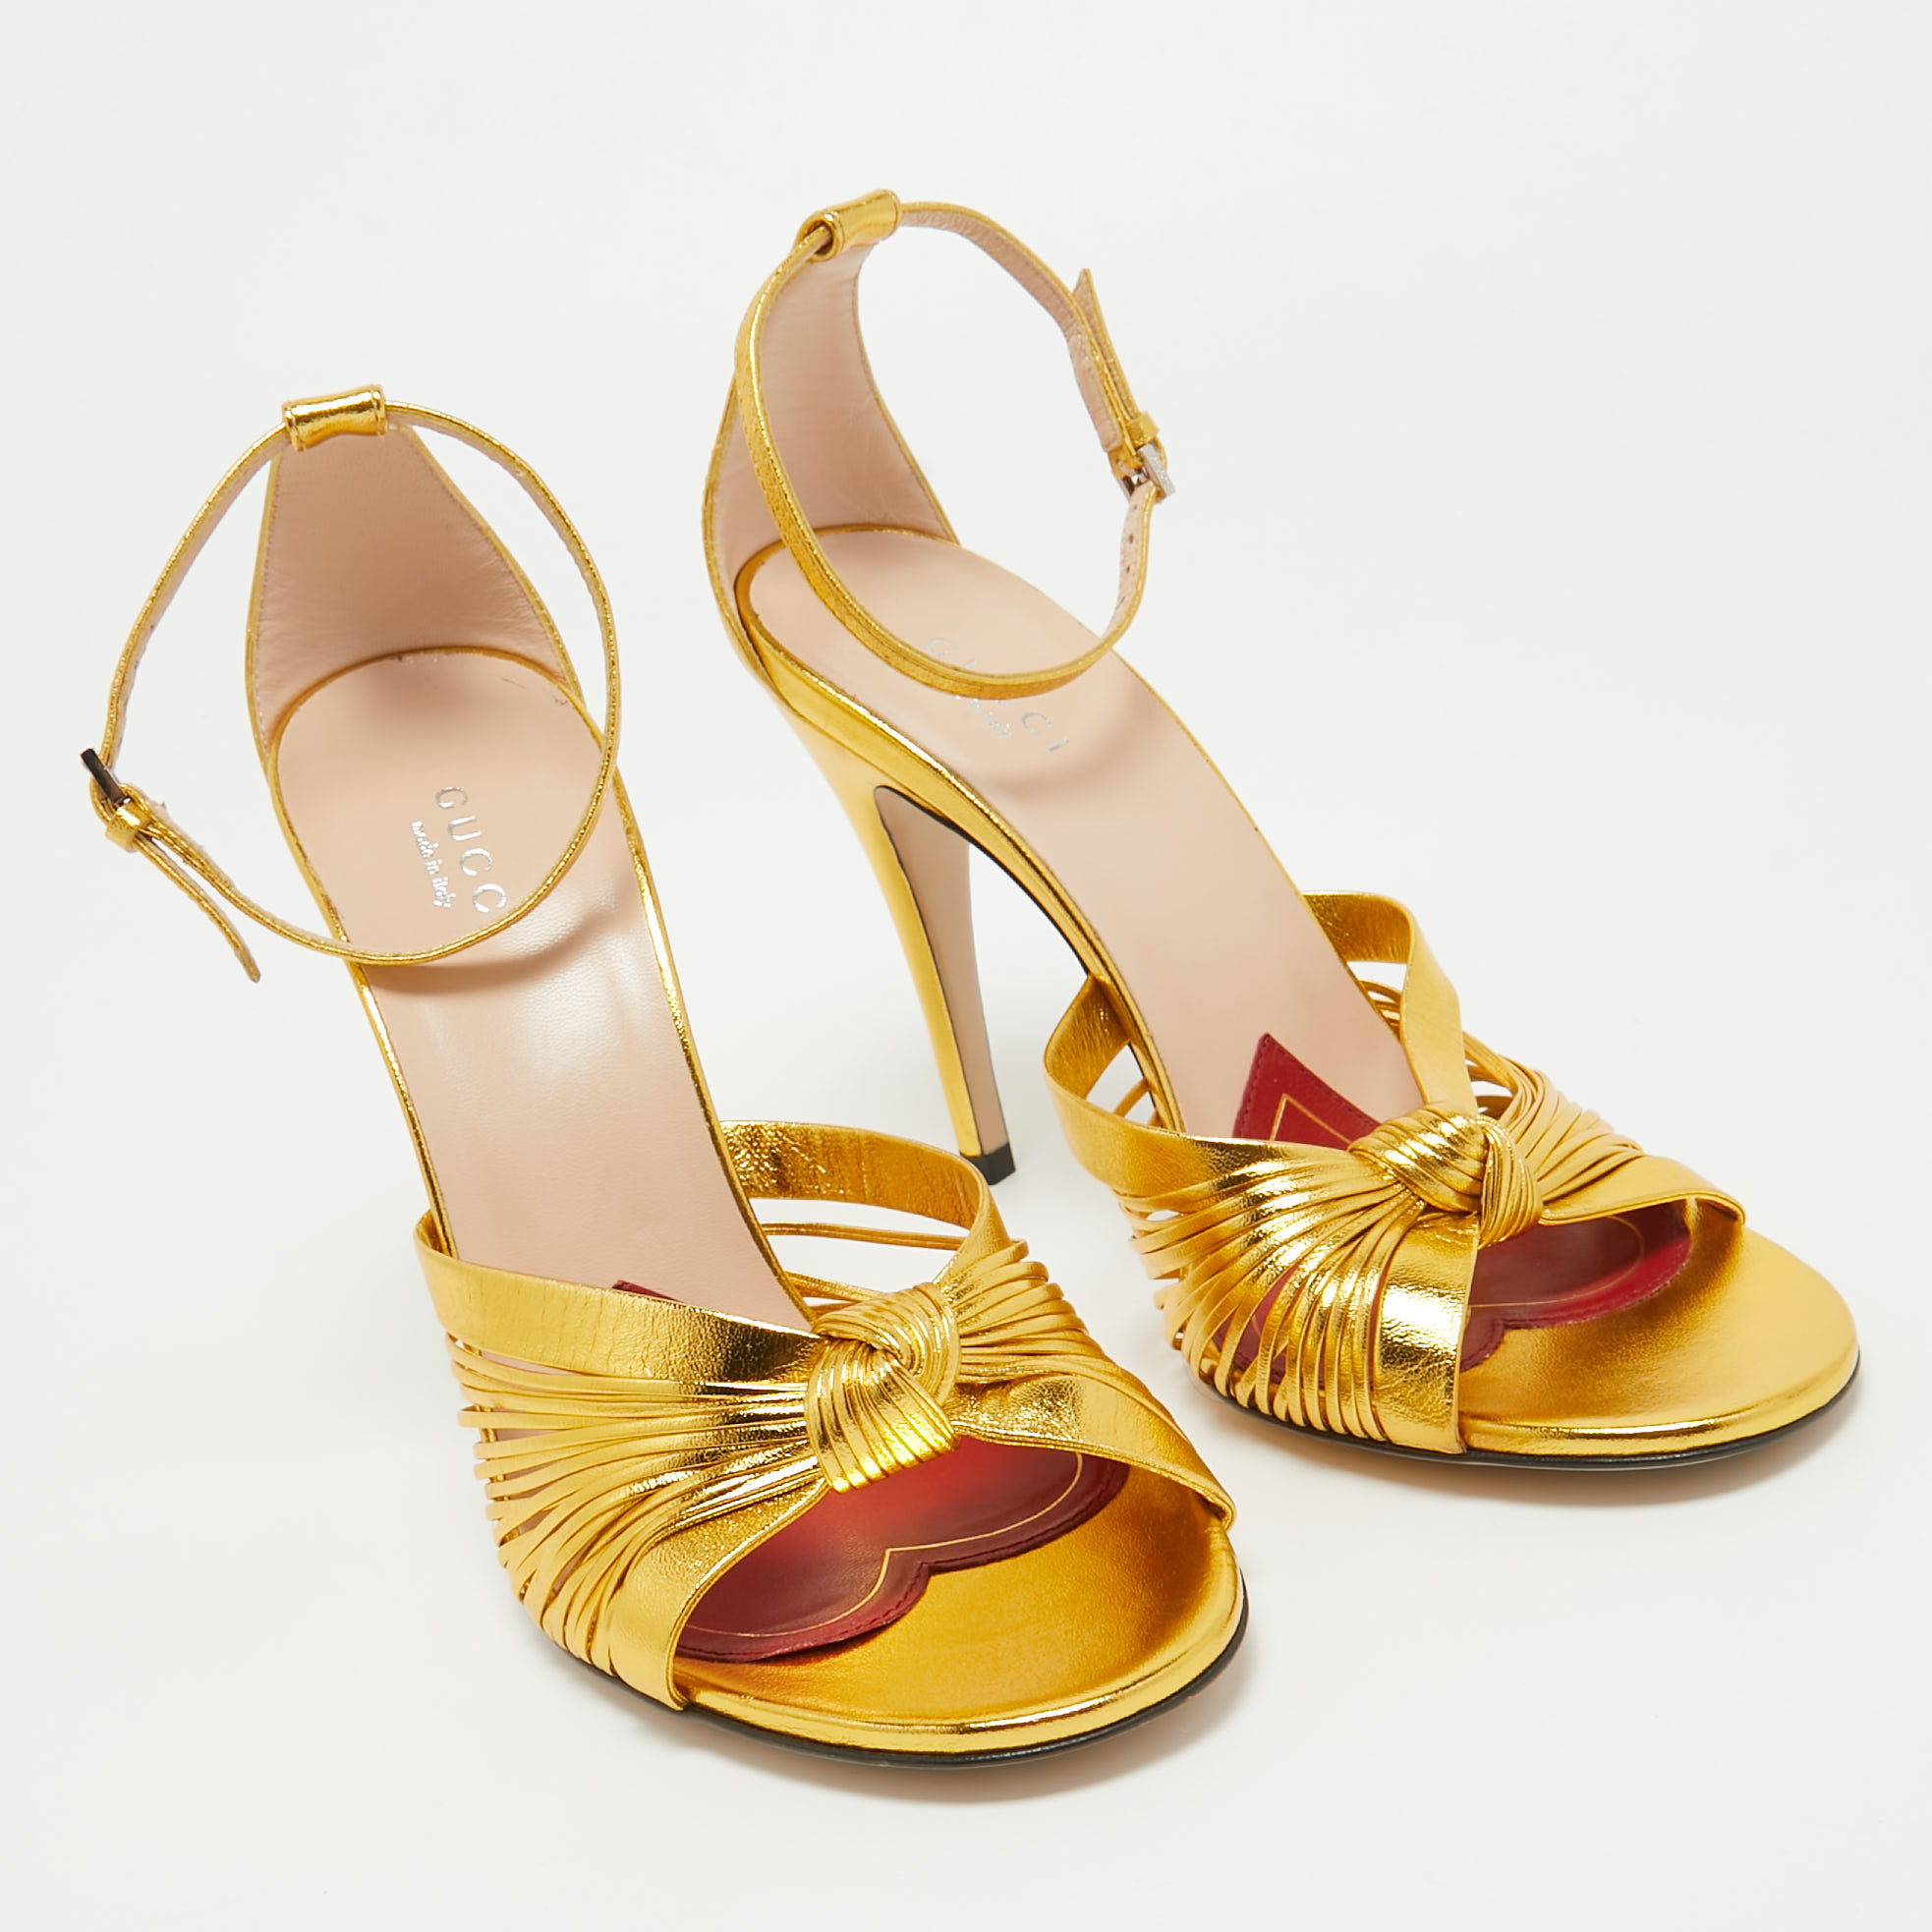 Gucci Metallic Gold Leather Allie Ankle Strap Sandals Size 38.5